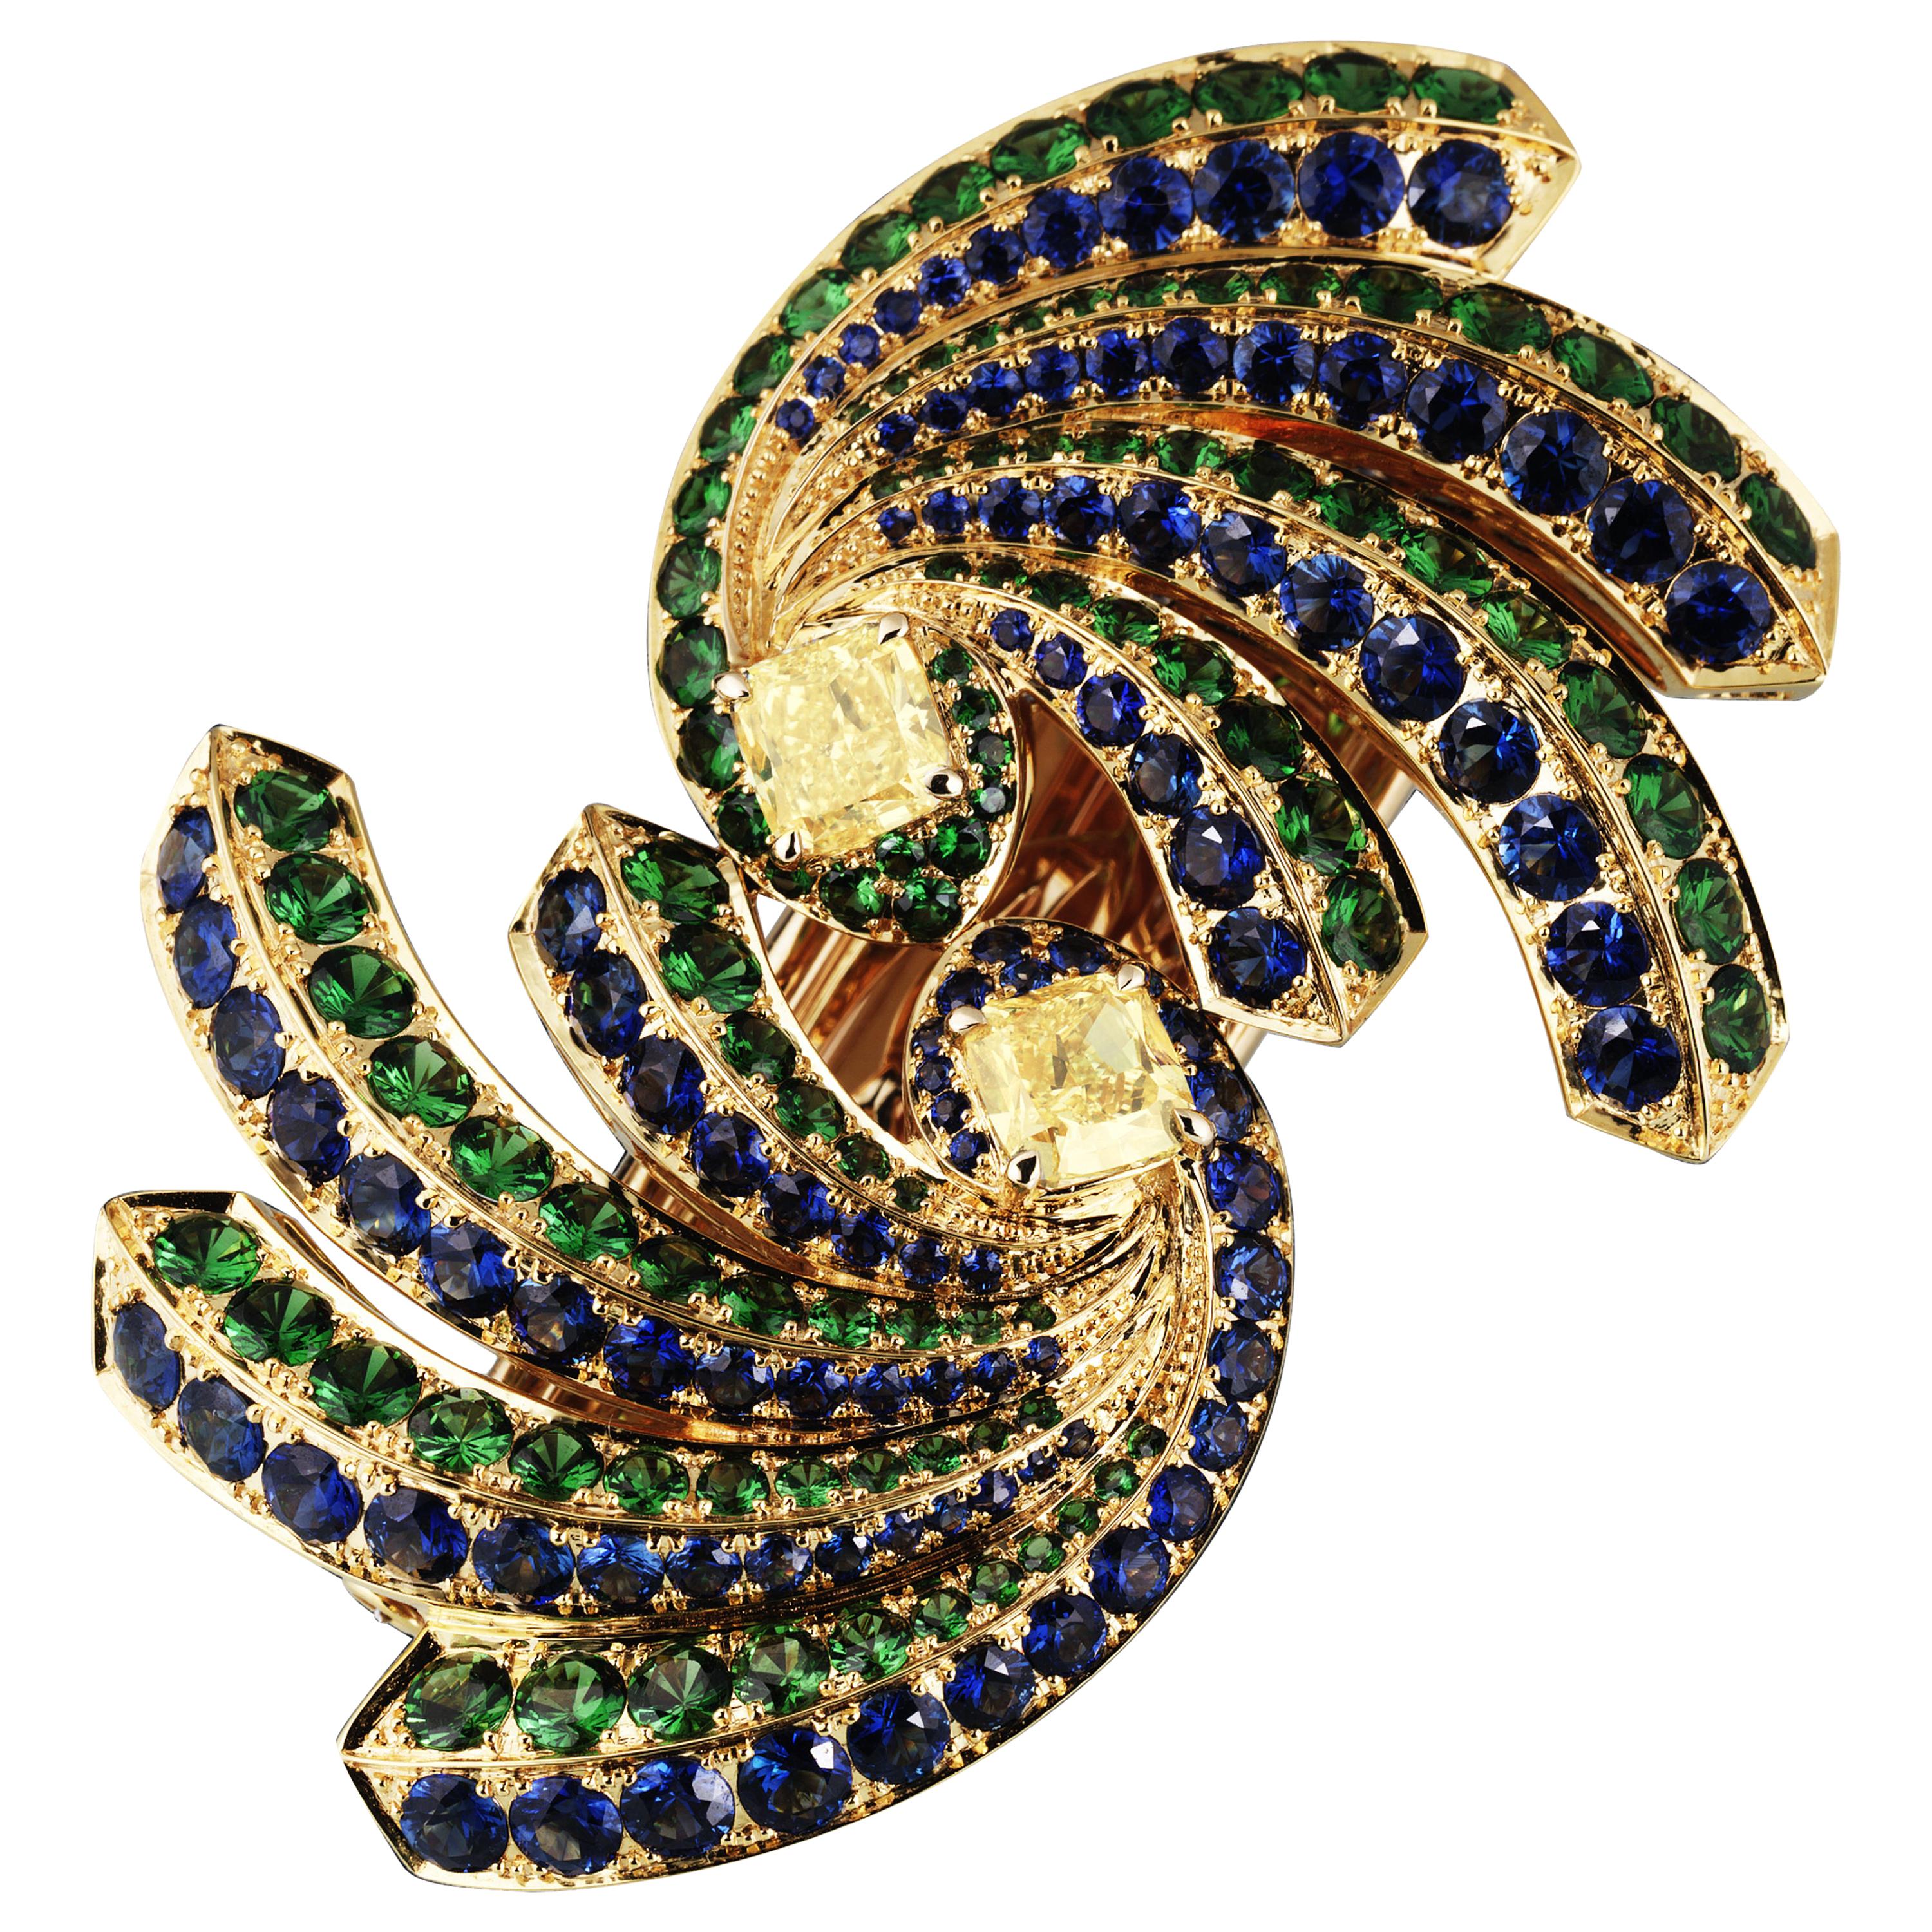 "Peacock" GIA Certified Yellow Diamond, Sapphire & Tsavorite Brooch or Hairclip For Sale